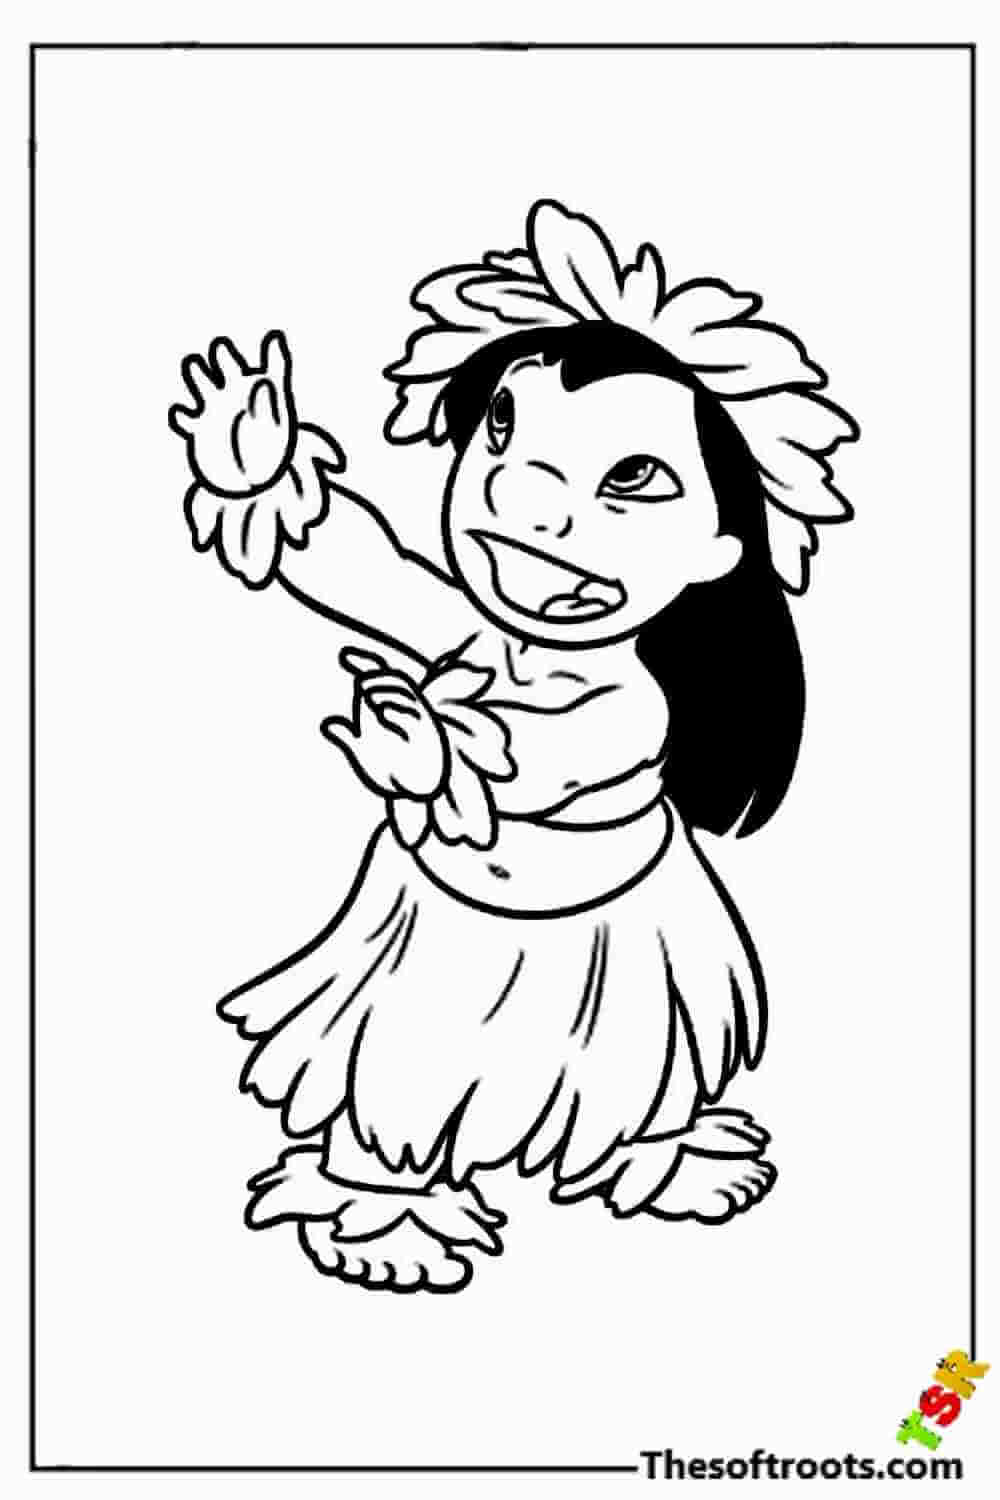 Lilo Dancing coloring pages